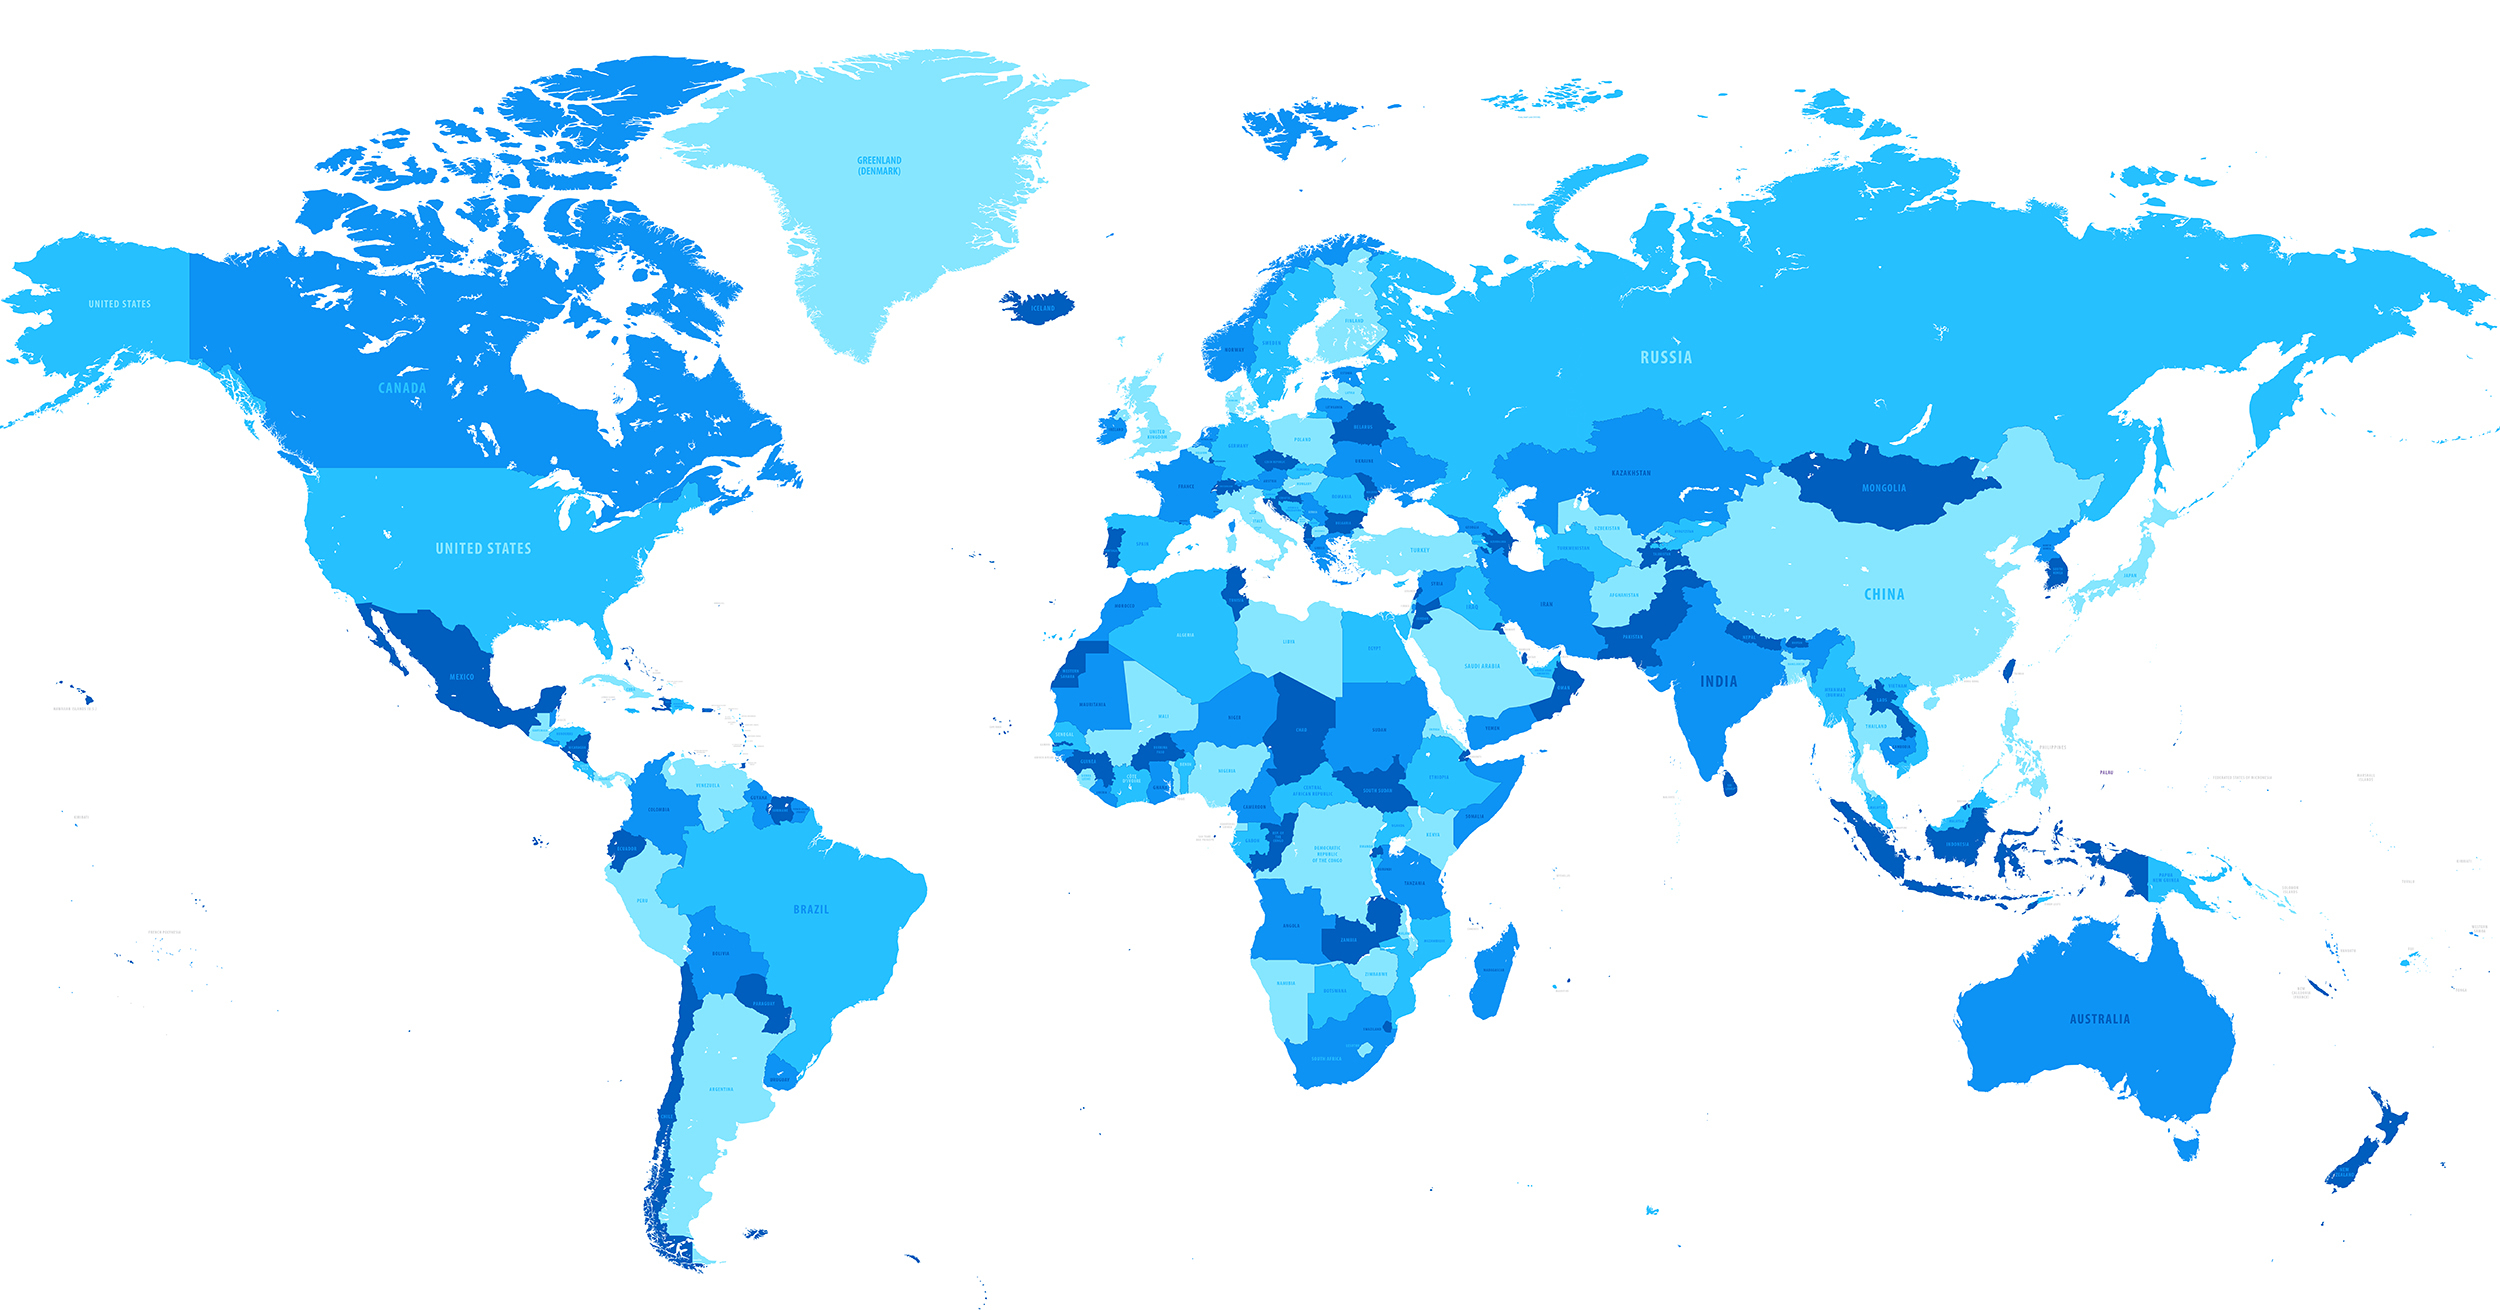 A blue map of the world with blue areas.